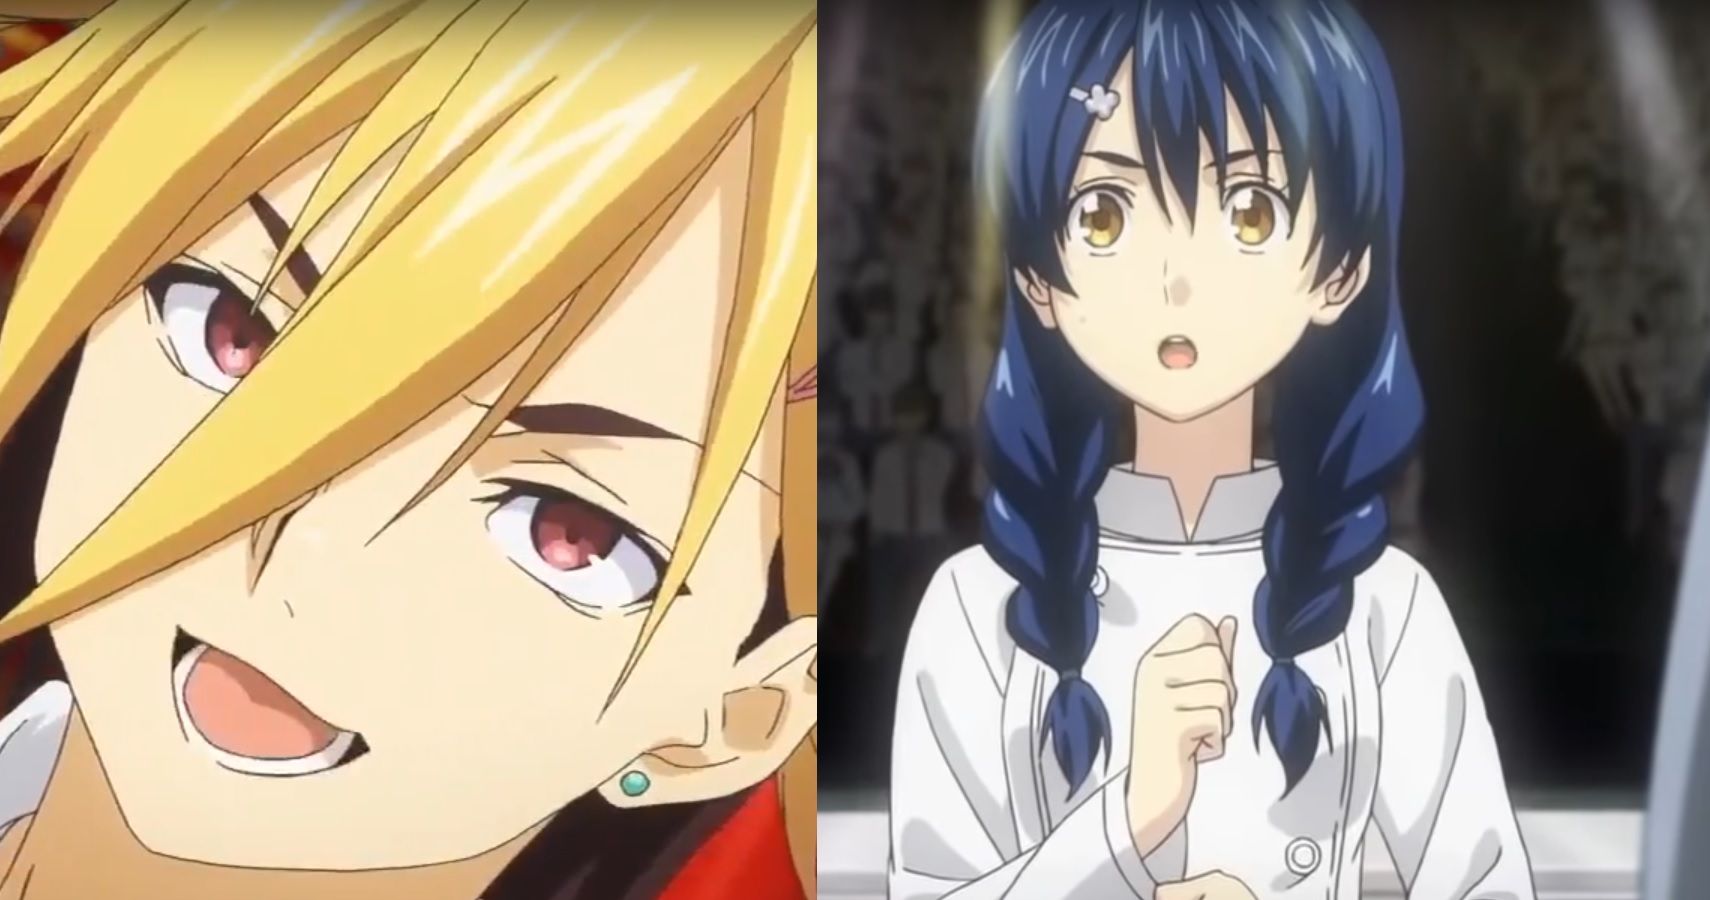 Food Wars: Ranking The Top 15 Hero Chefs From Worst To Best